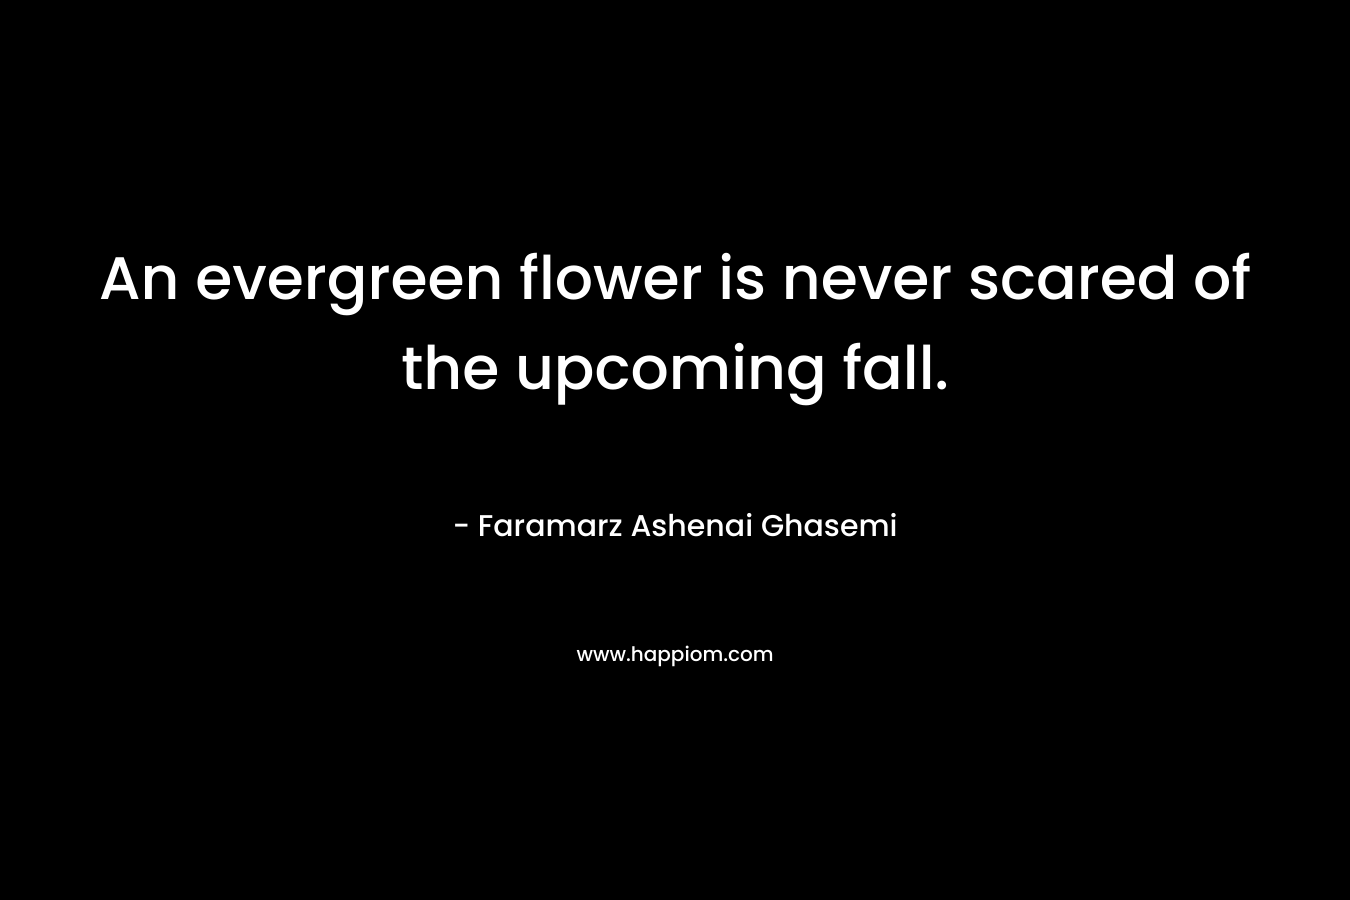 An evergreen flower is never scared of the upcoming fall.